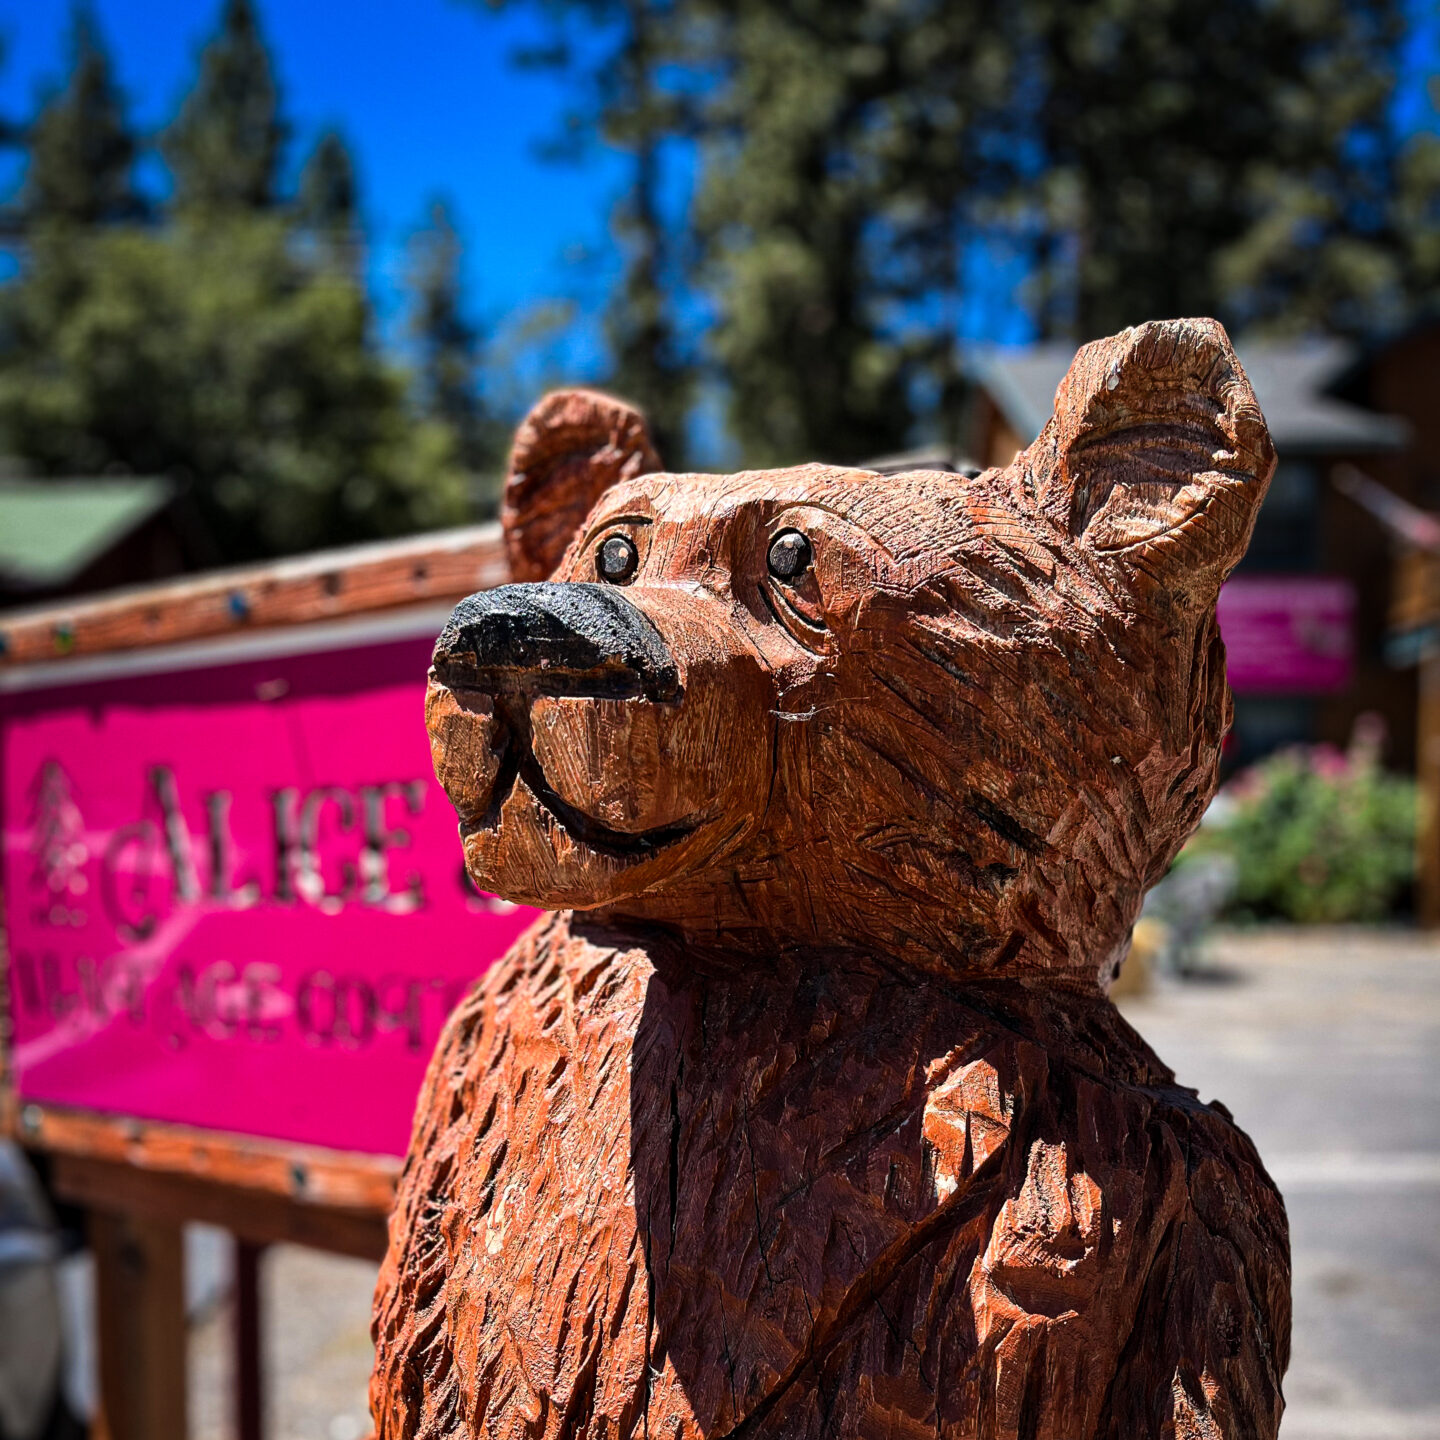 Bear Chainsaw Sculpture, Wrightwood, California [Photography]